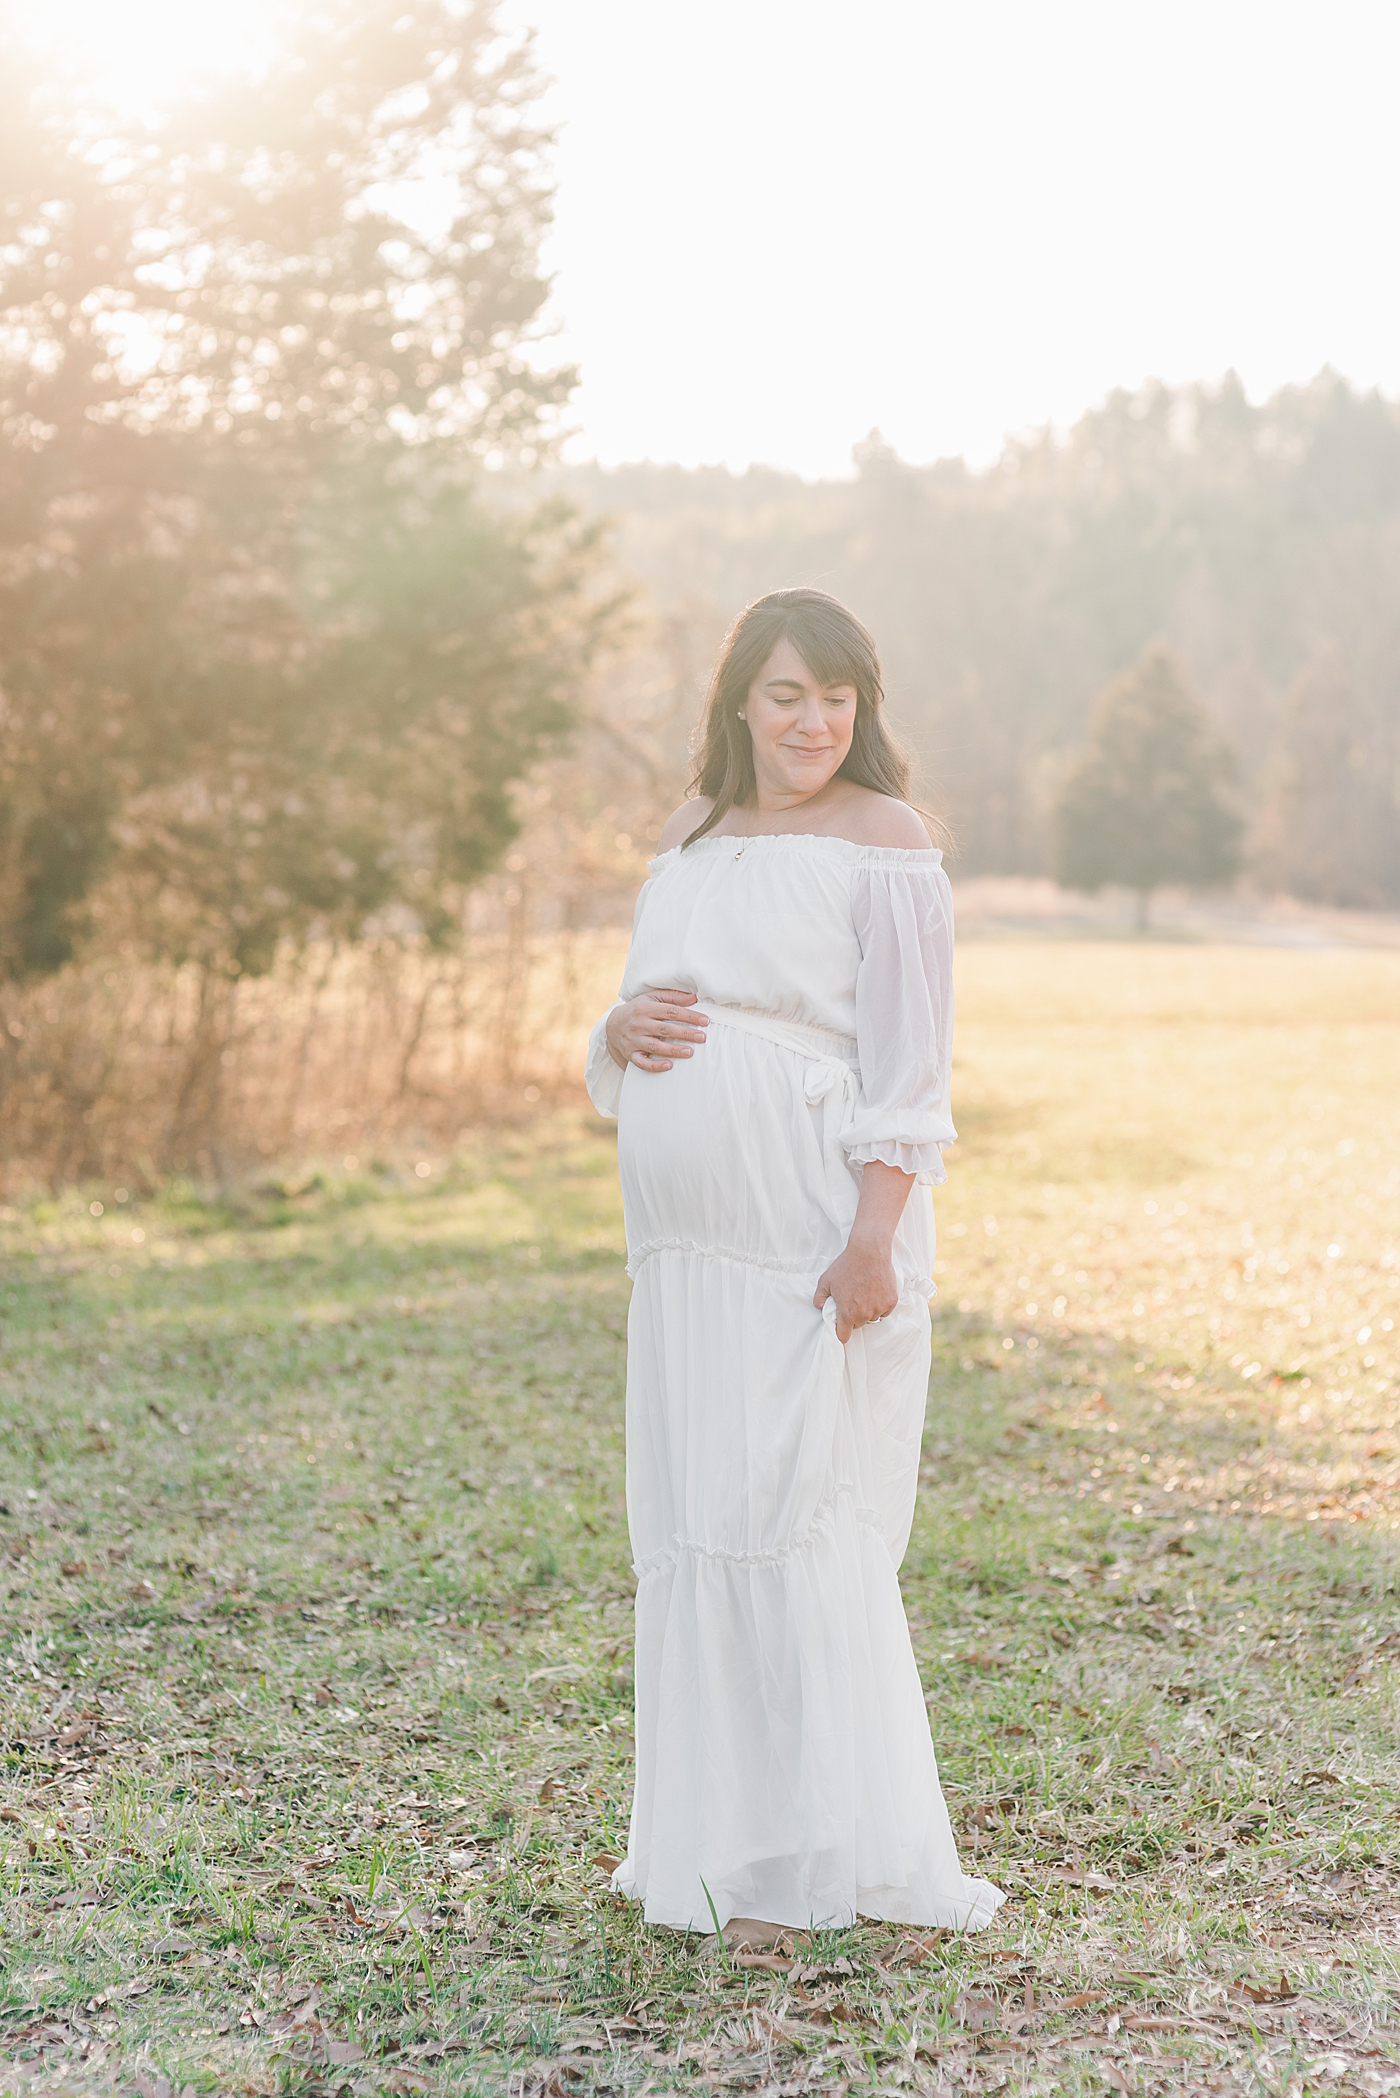 Sunset photos of pregnant mom at Fisher Farm Park in Davidson | Photo by Anna Wisjo Photography